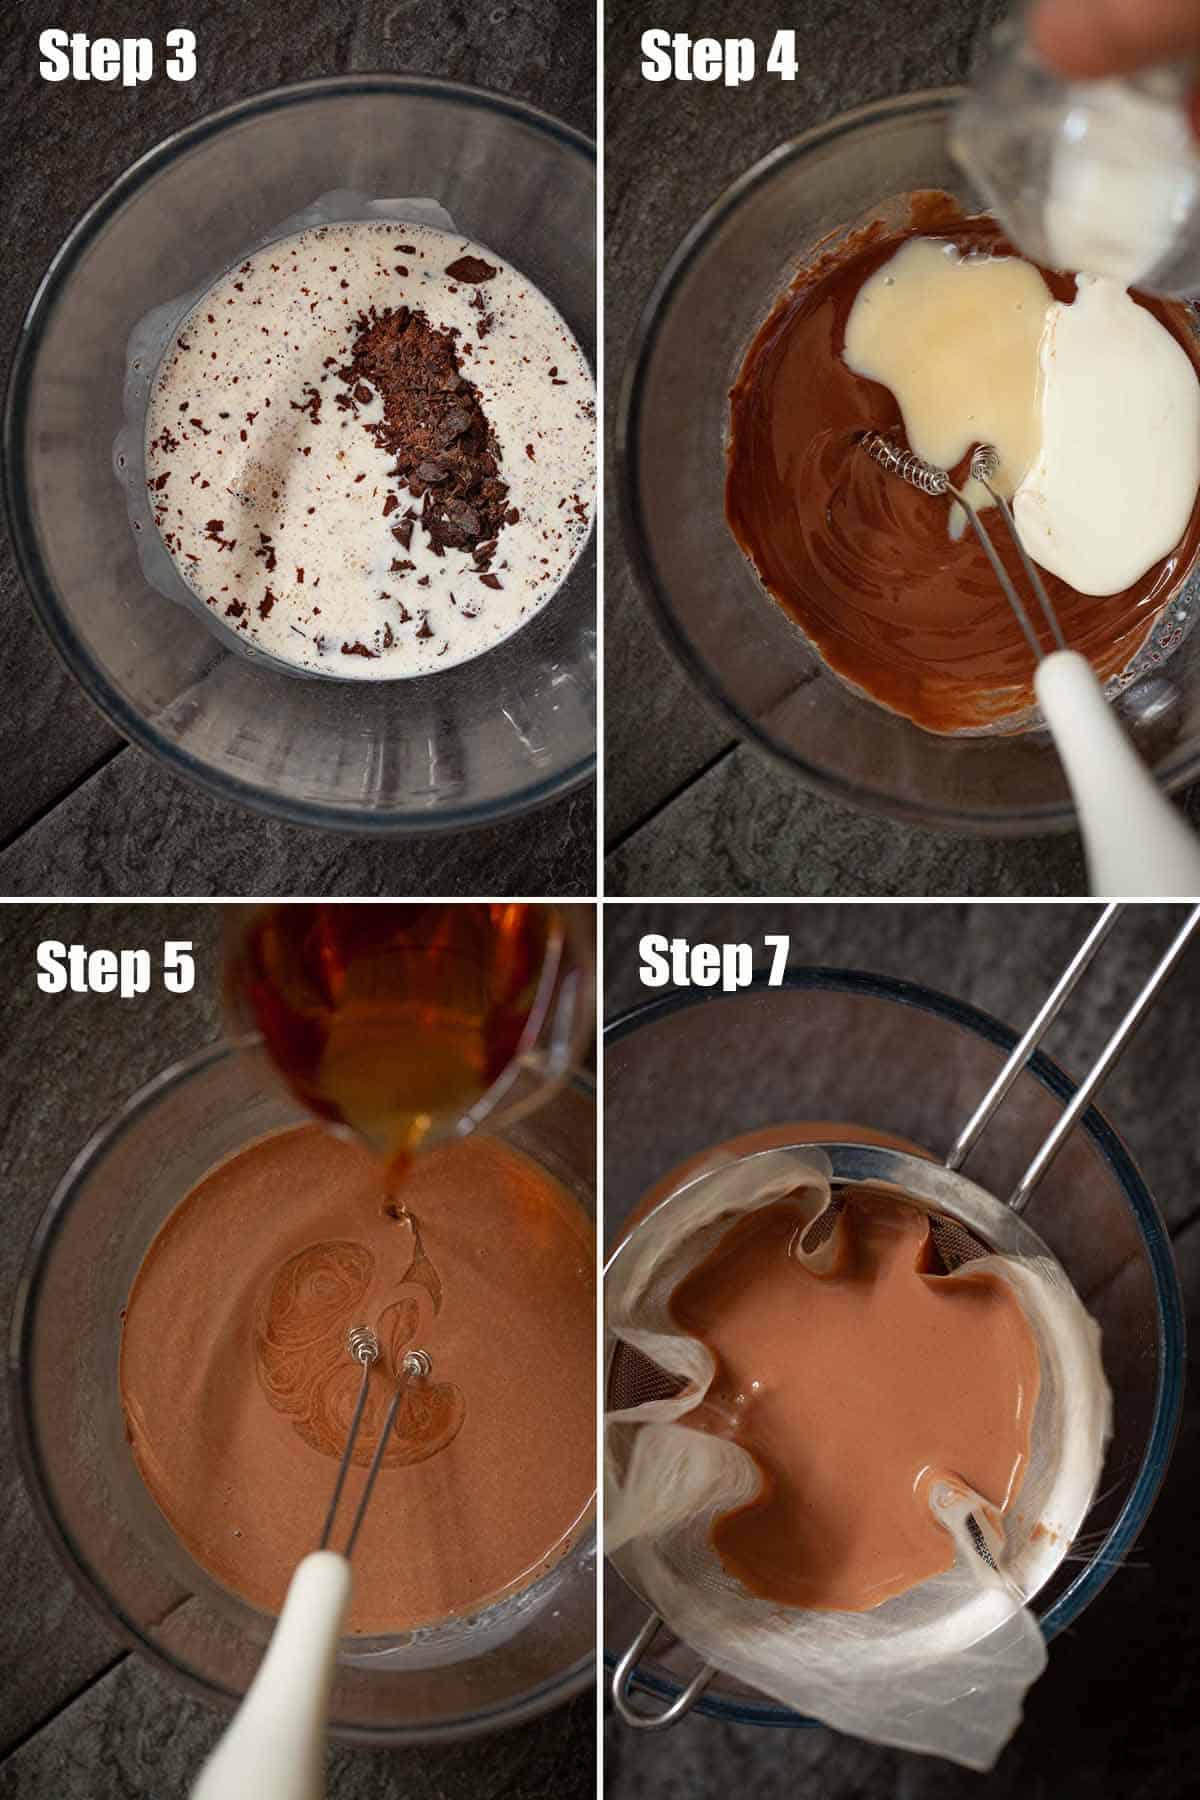 Collage of images showing chocolate cream liqueur being made.